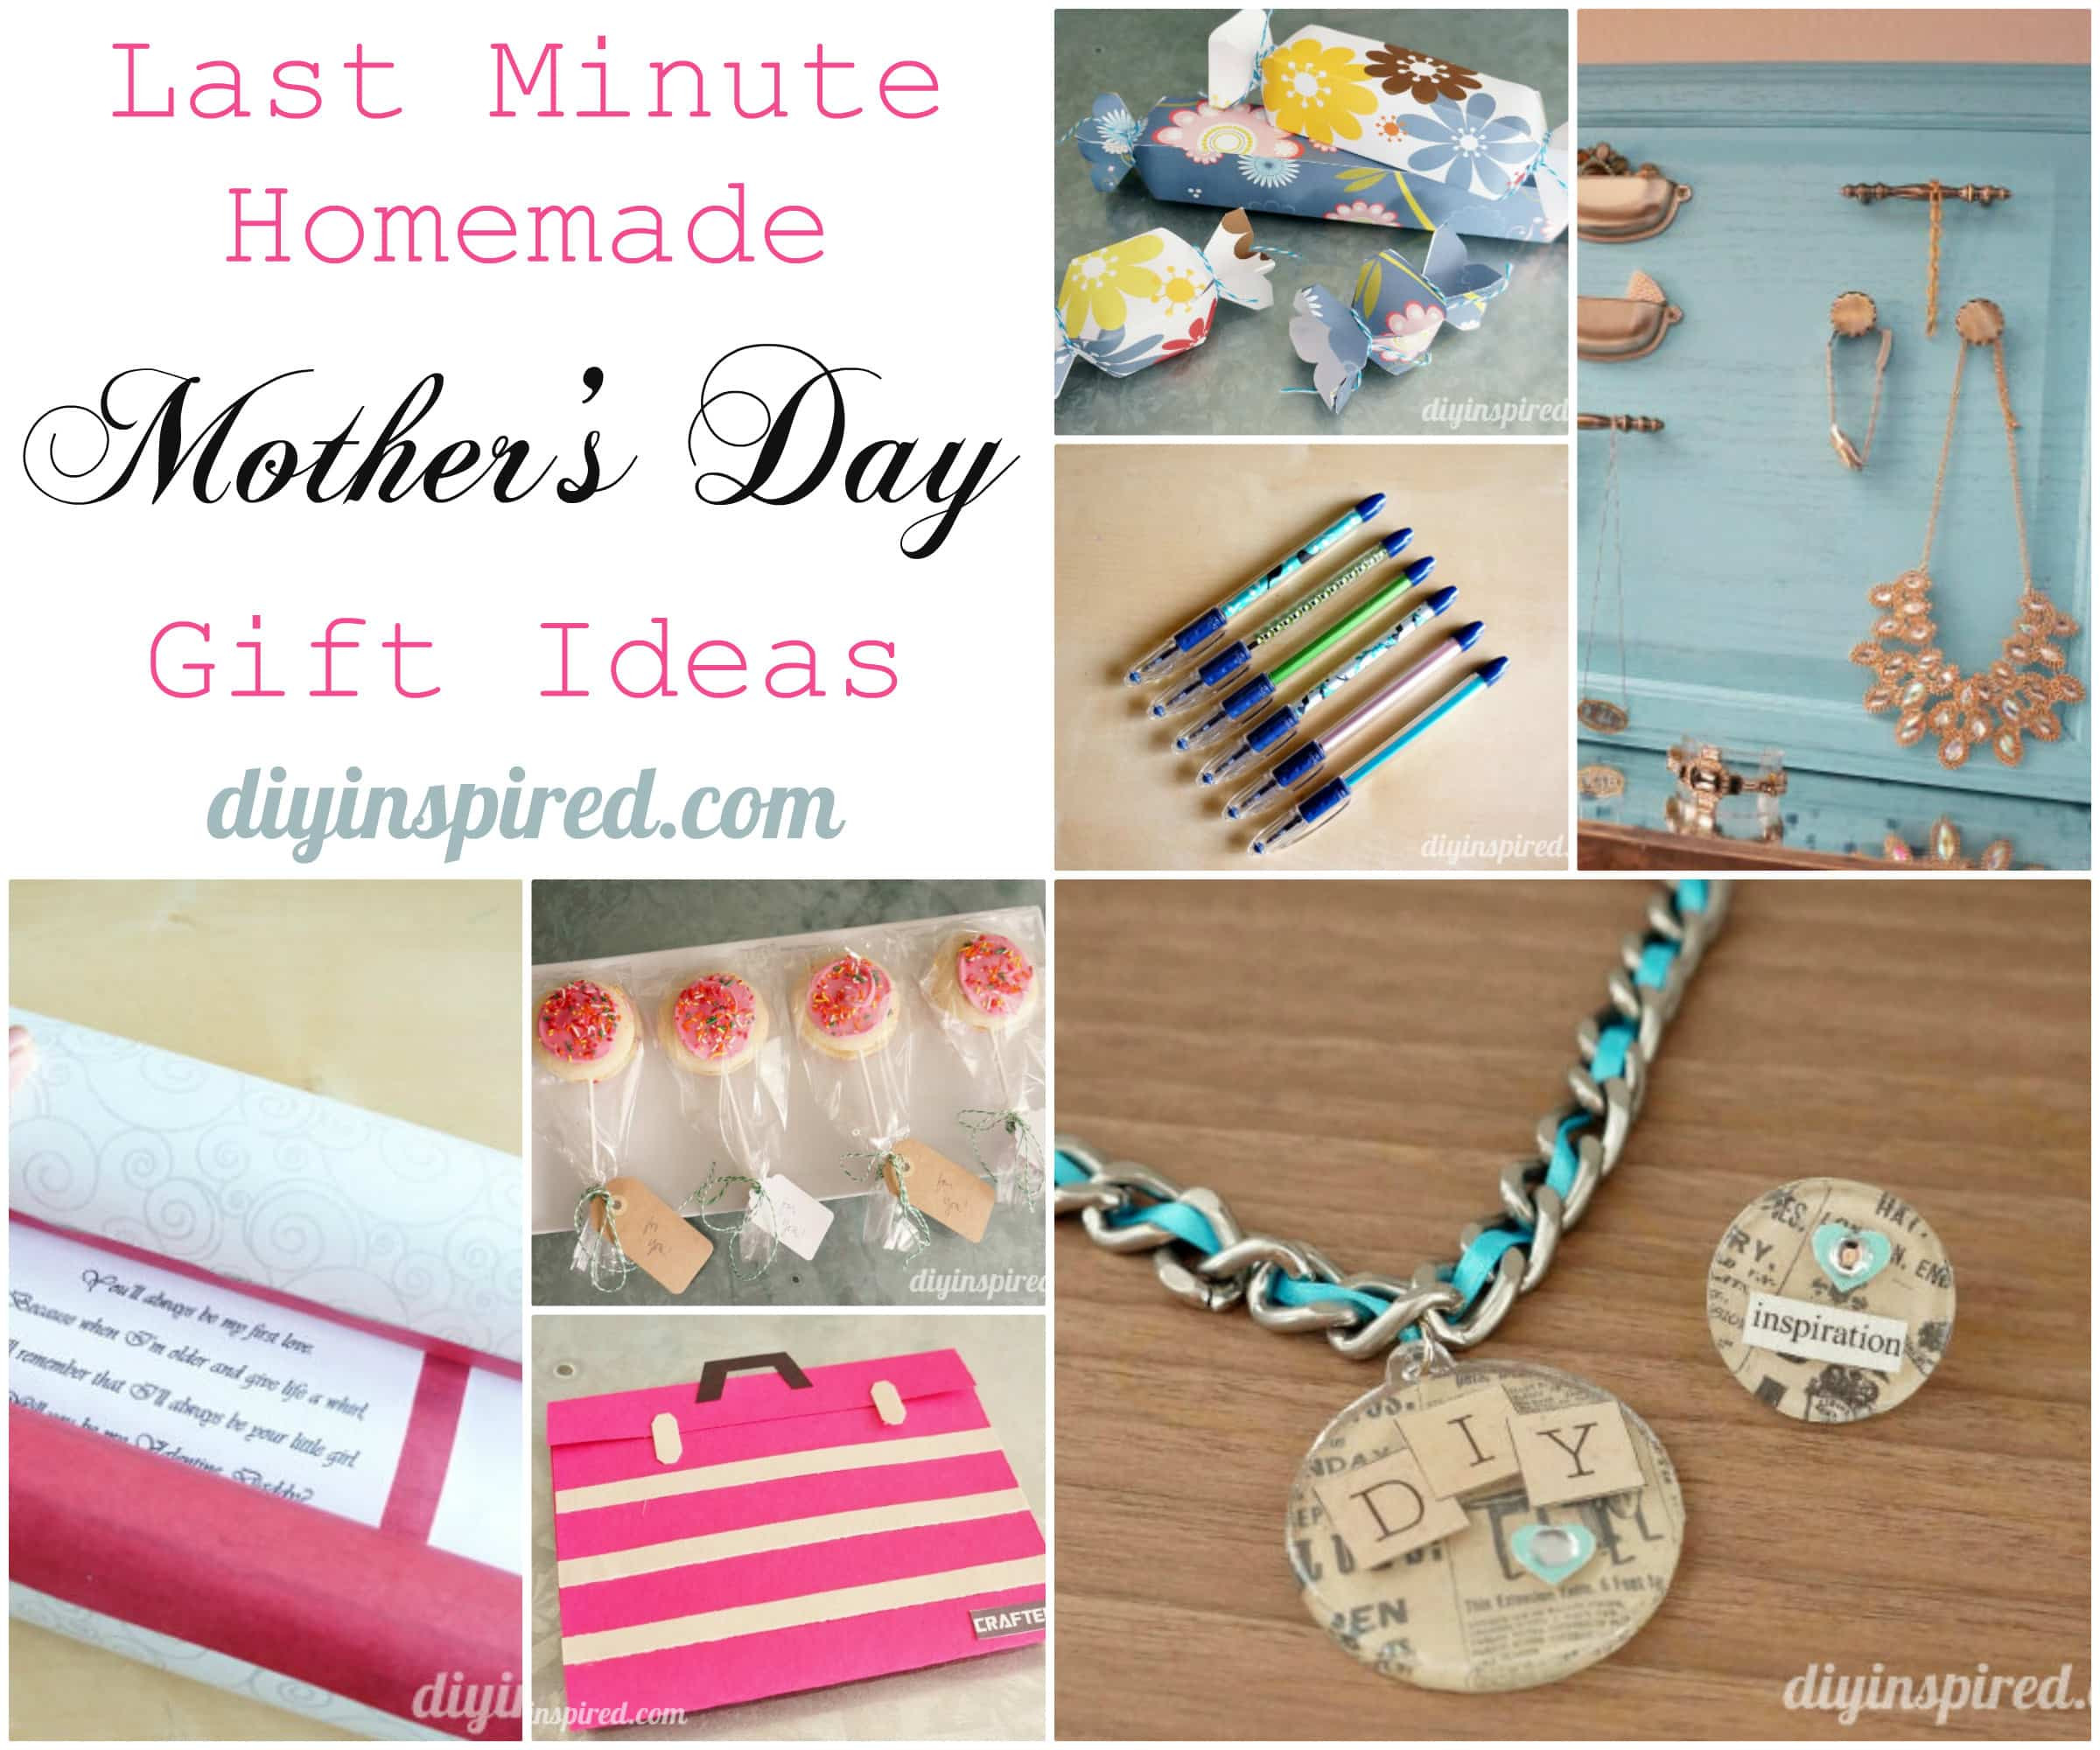 Last Minute DIY Mother'S Day Gifts
 Last Minute Homemade Mother’s Day Gift Ideas DIY Inspired